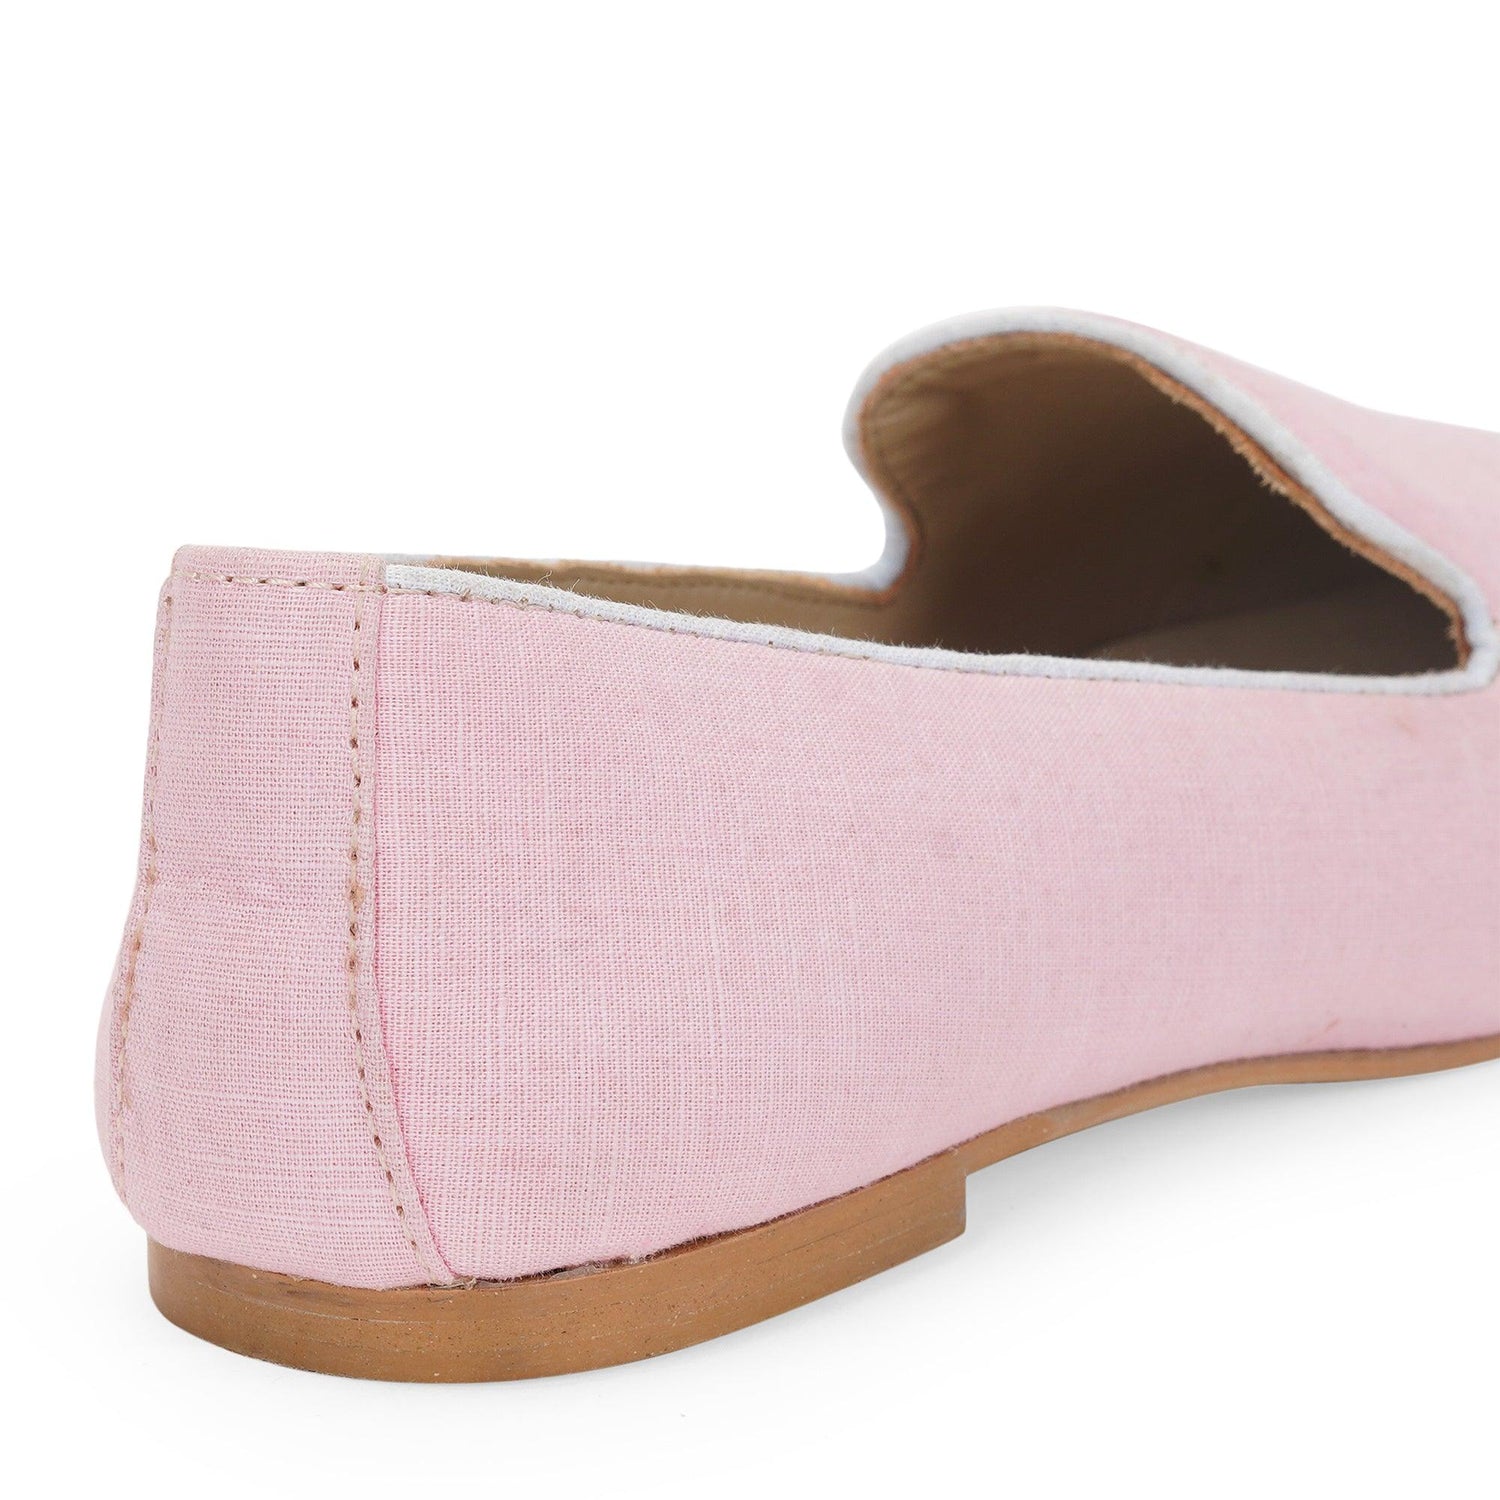 Marbella Loafers